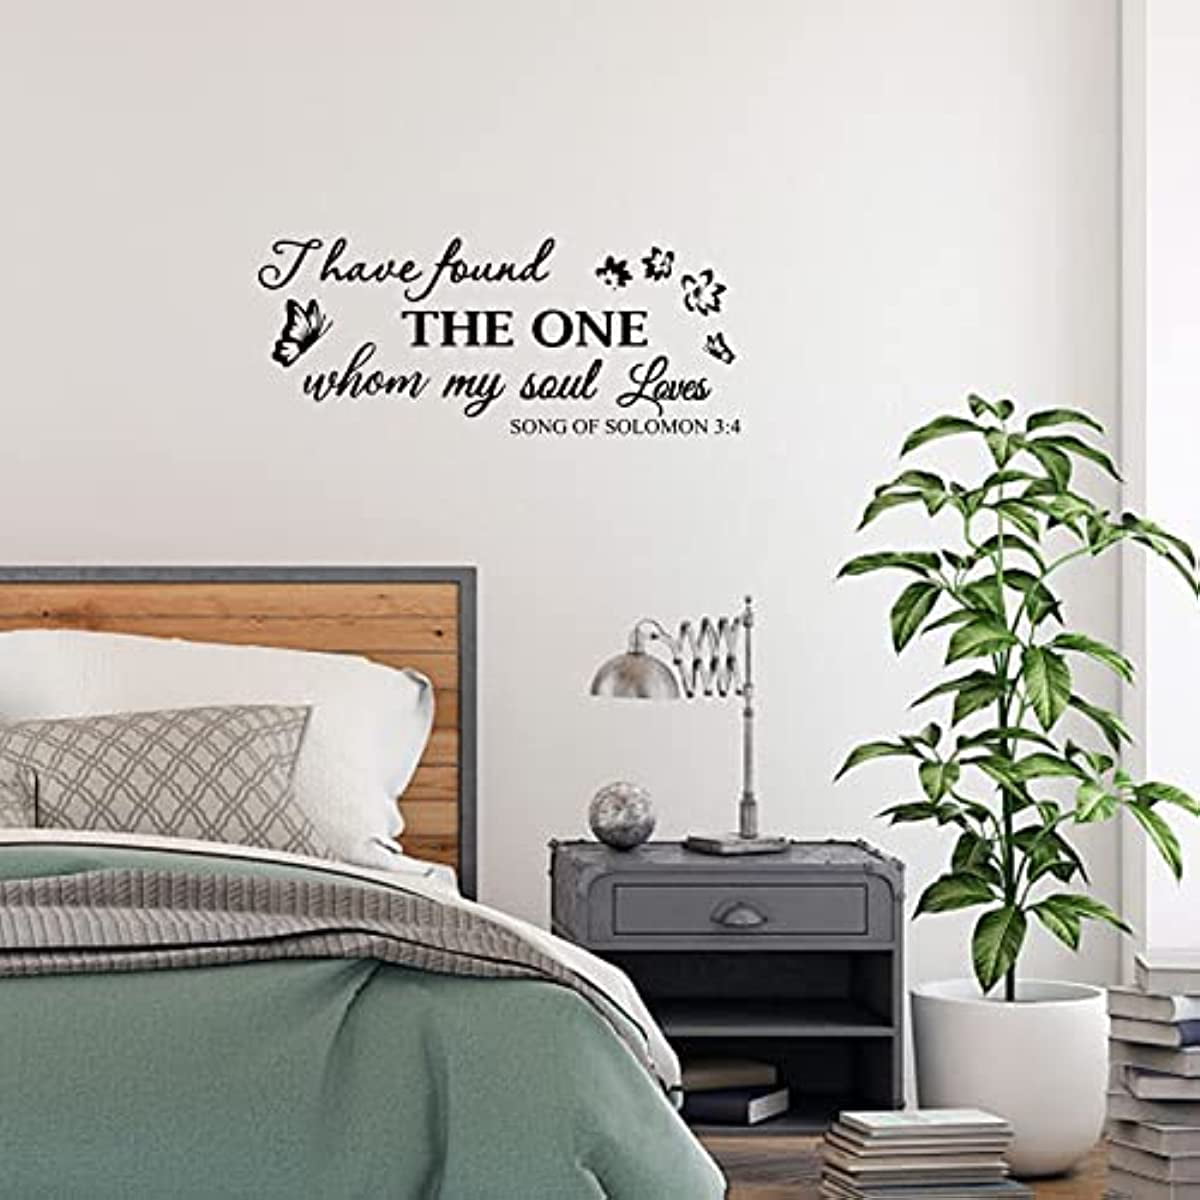 Reach for the Stars Quote Decal Sticker Bedroom Living Room Wall Vinyl –  boop decals